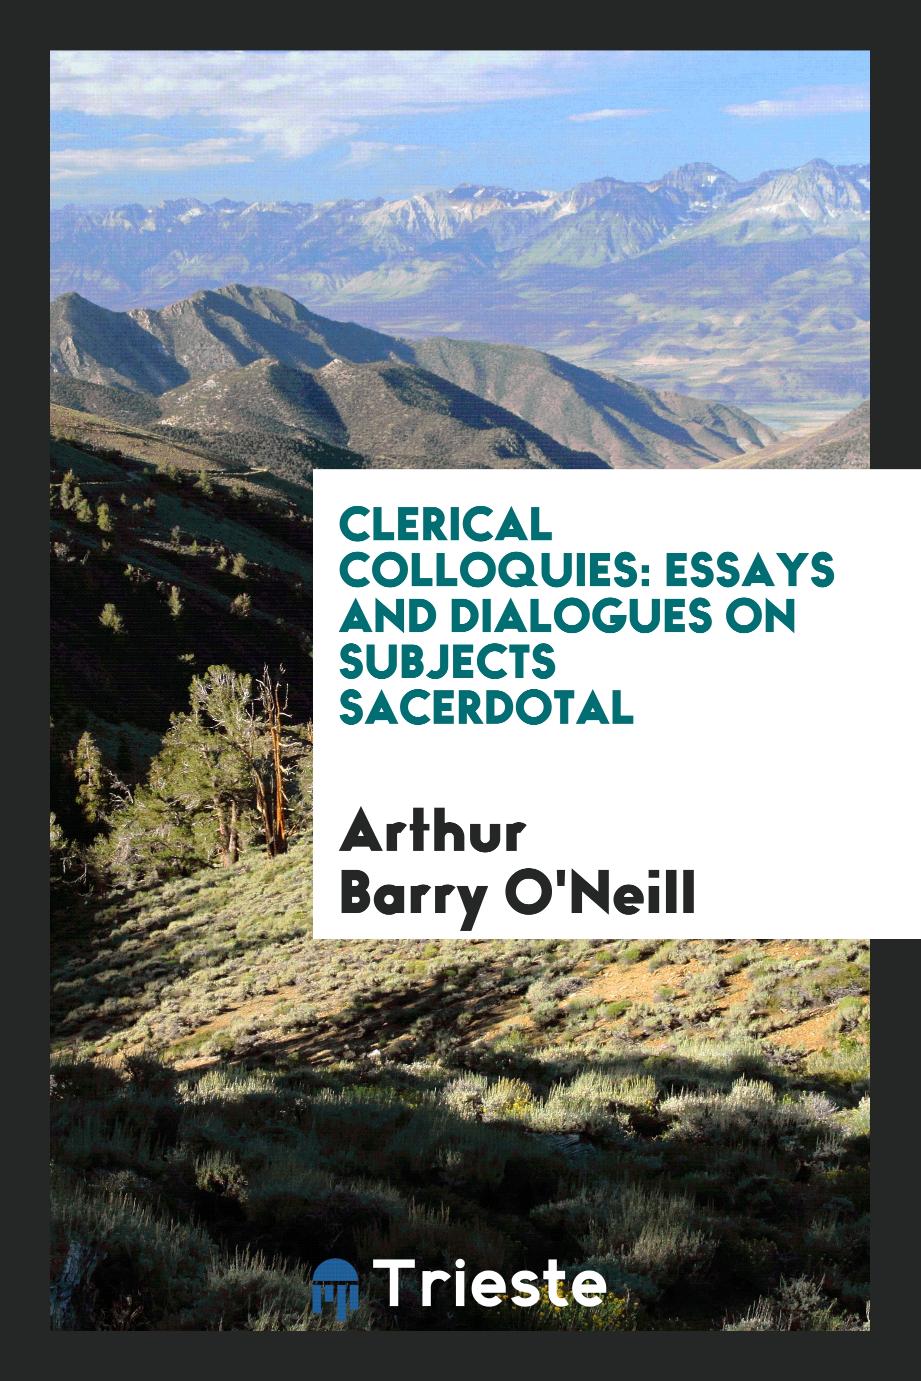 Clerical colloquies: essays and dialogues on subjects sacerdotal